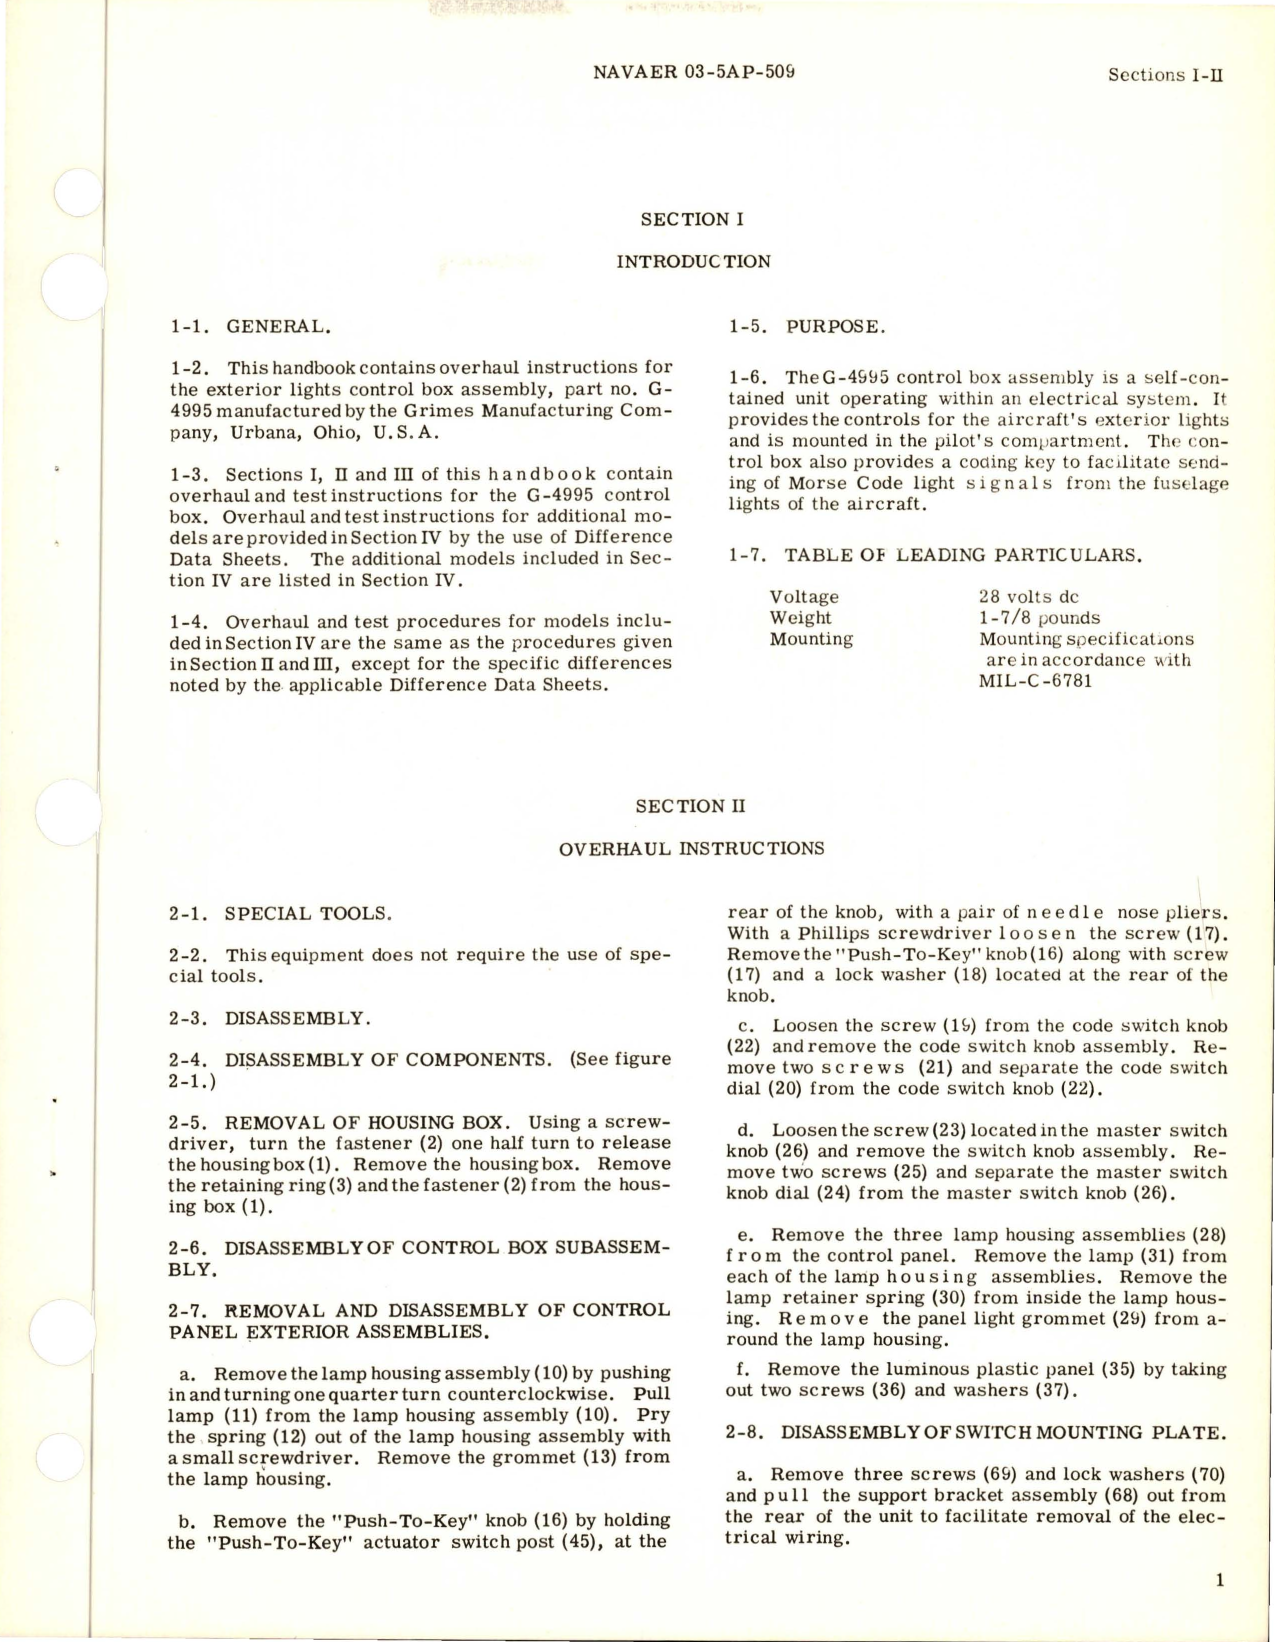 Sample page 5 from AirCorps Library document: Overhaul Instructions for Exterior Lights Control Box - Parts G-4995, G-4995-1, G-4995A, G-4995A-1, G-5185, and G-5185-1